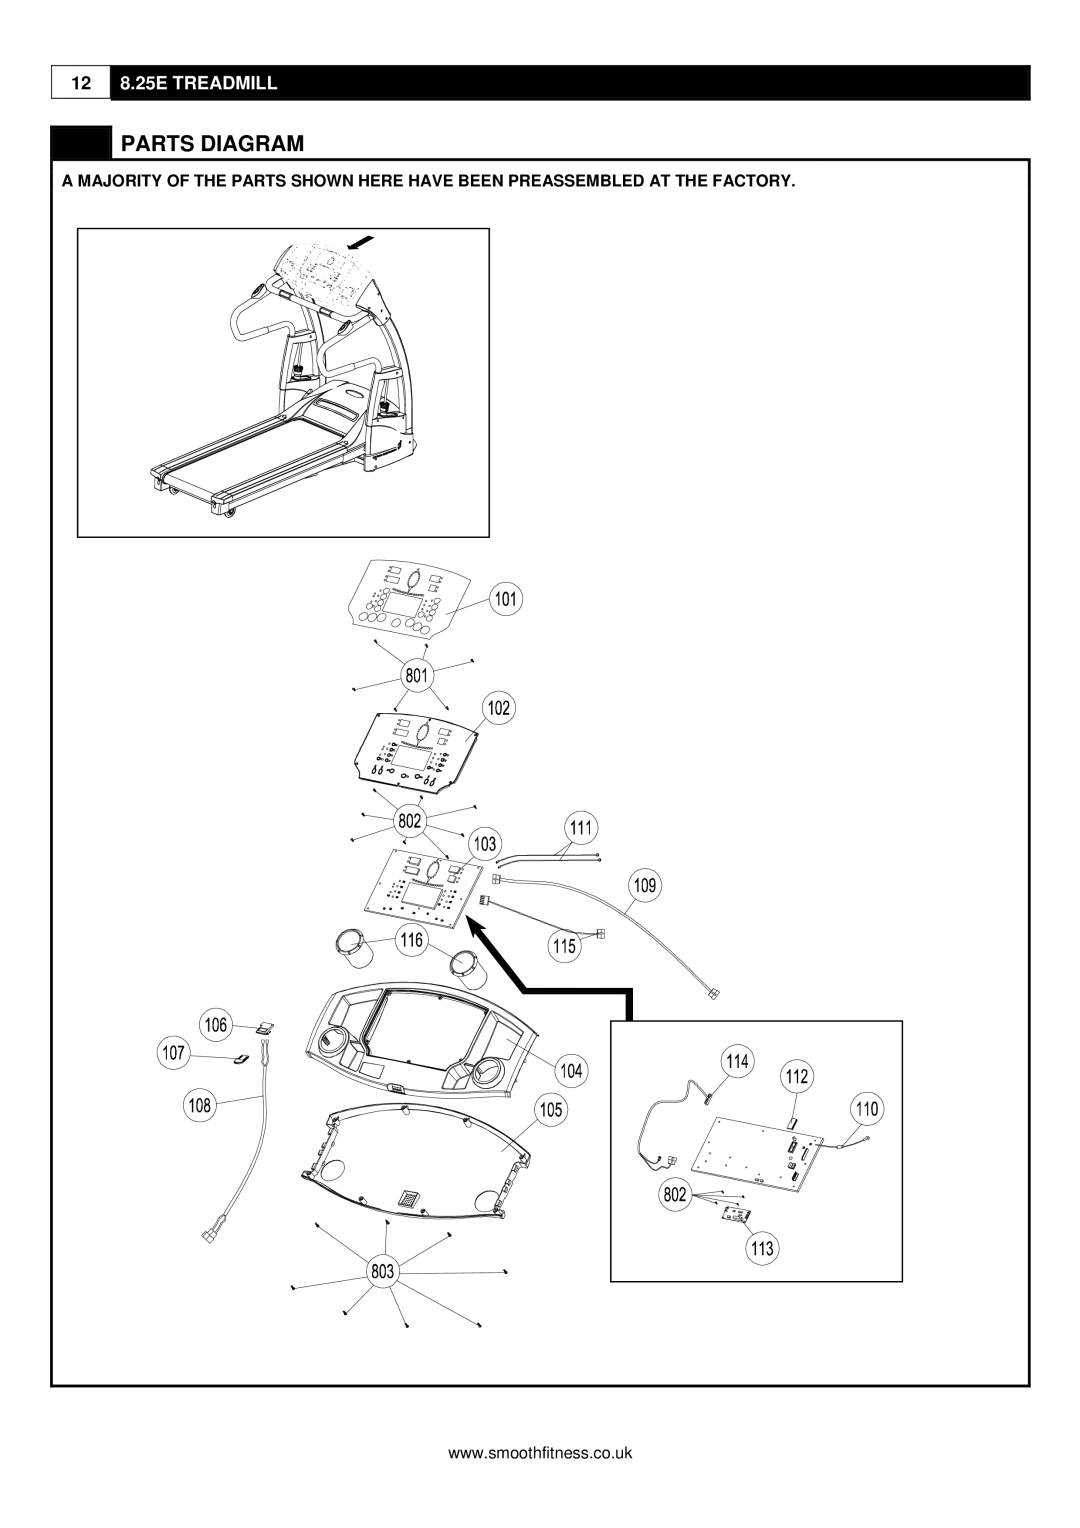 Smooth Fitness 8.25E user manual Parts Diagram 